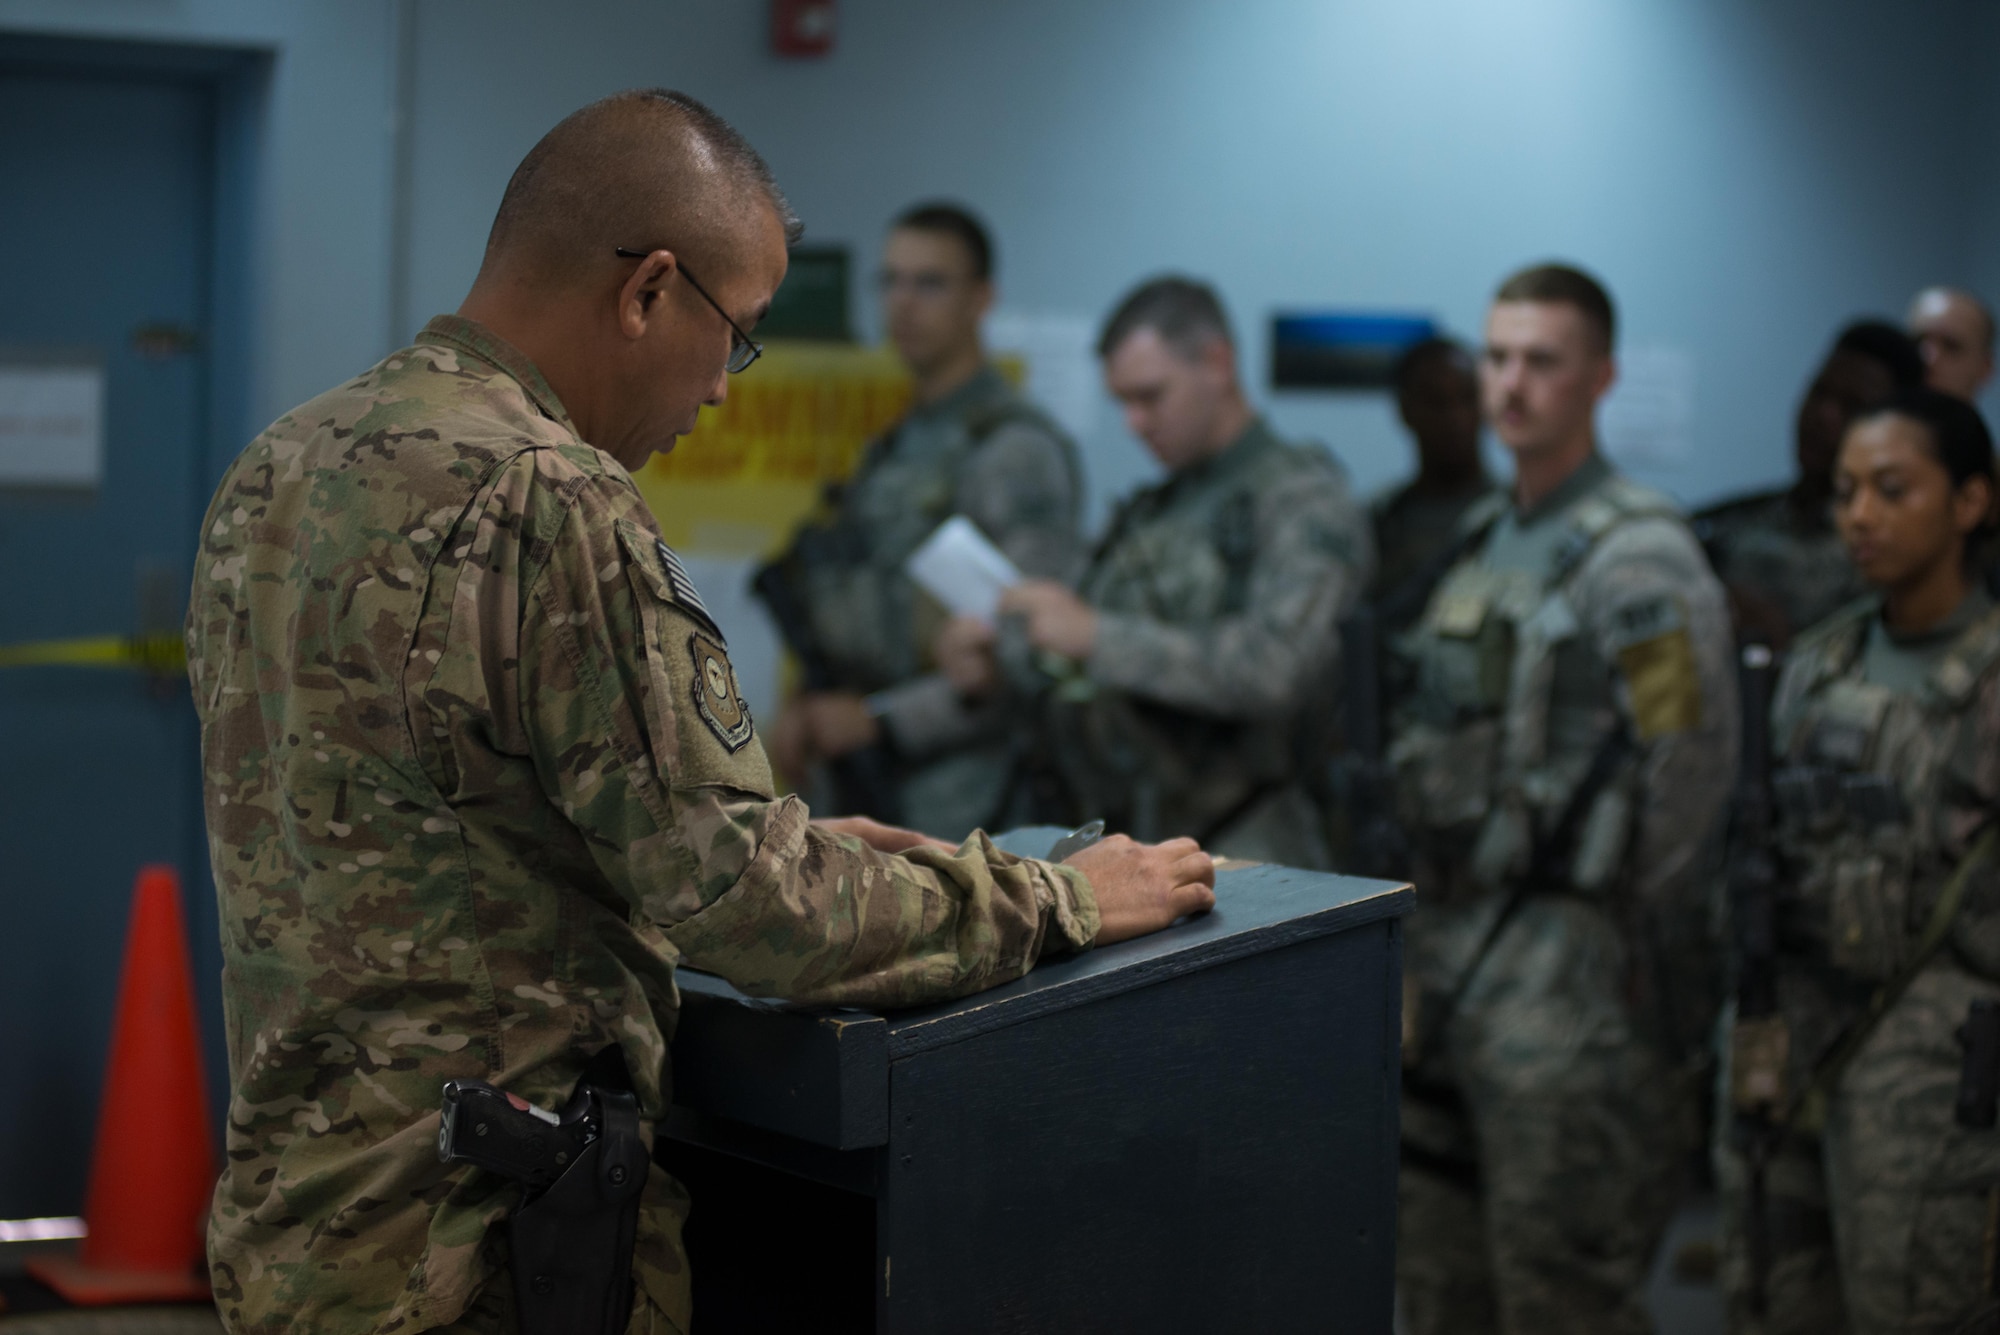 U.S. Air National Guard Master Sgt. Anthony Arriola, flight chief with the 407th Expeditionary Security Forces Squadron, left, briefs Airmen and U.S. Marines during guard changeover May 13, 2017, in Southwest Asia. Arriola works as part of the base defense operations center to oversee inegrated base defense activities, from patrols to vehicle search and gate guard sections. Arriola is deployed from the 254th Security  Forces Squadron of the Guam Air National Guard and serves as a civilian police officer with the Guam Police Department when not on active Air Force orders. (U.S. Air Force photo by Staff Sgt. Alexander W. Riedel)